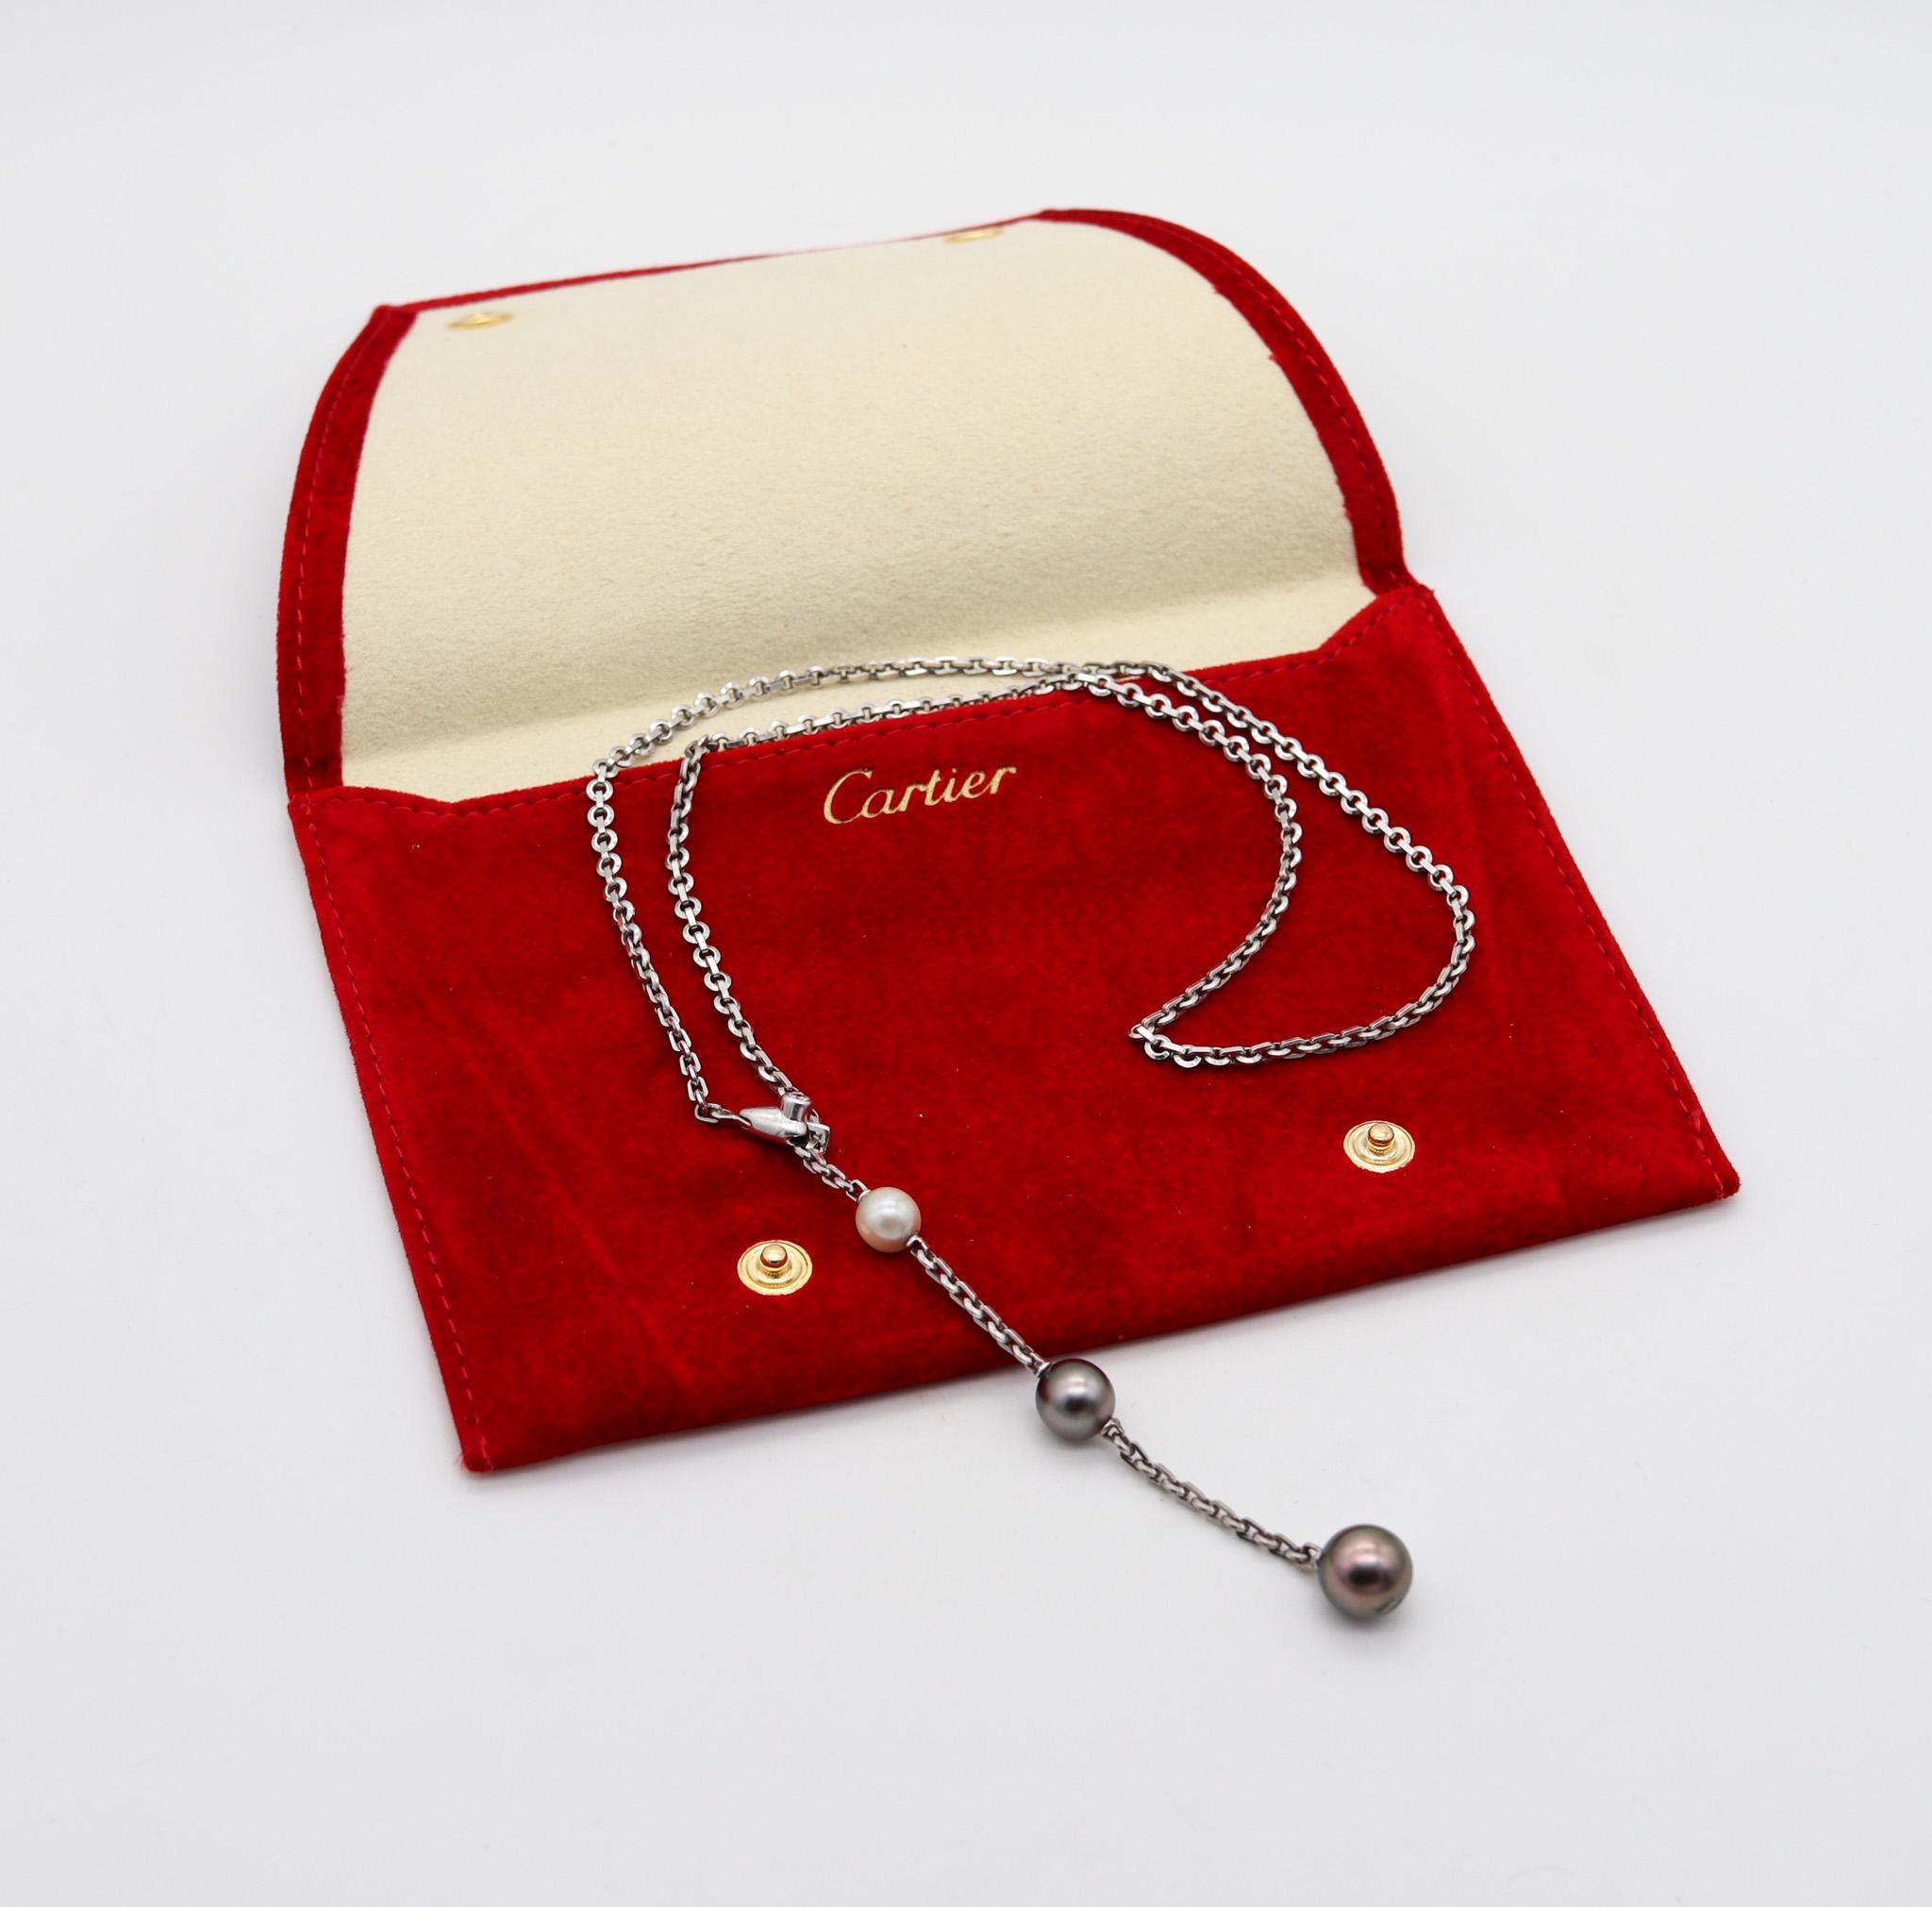 Cartier Paris Calin Lariat Necklace In 18Kt White Gold With Diamond And Pearls For Sale 2